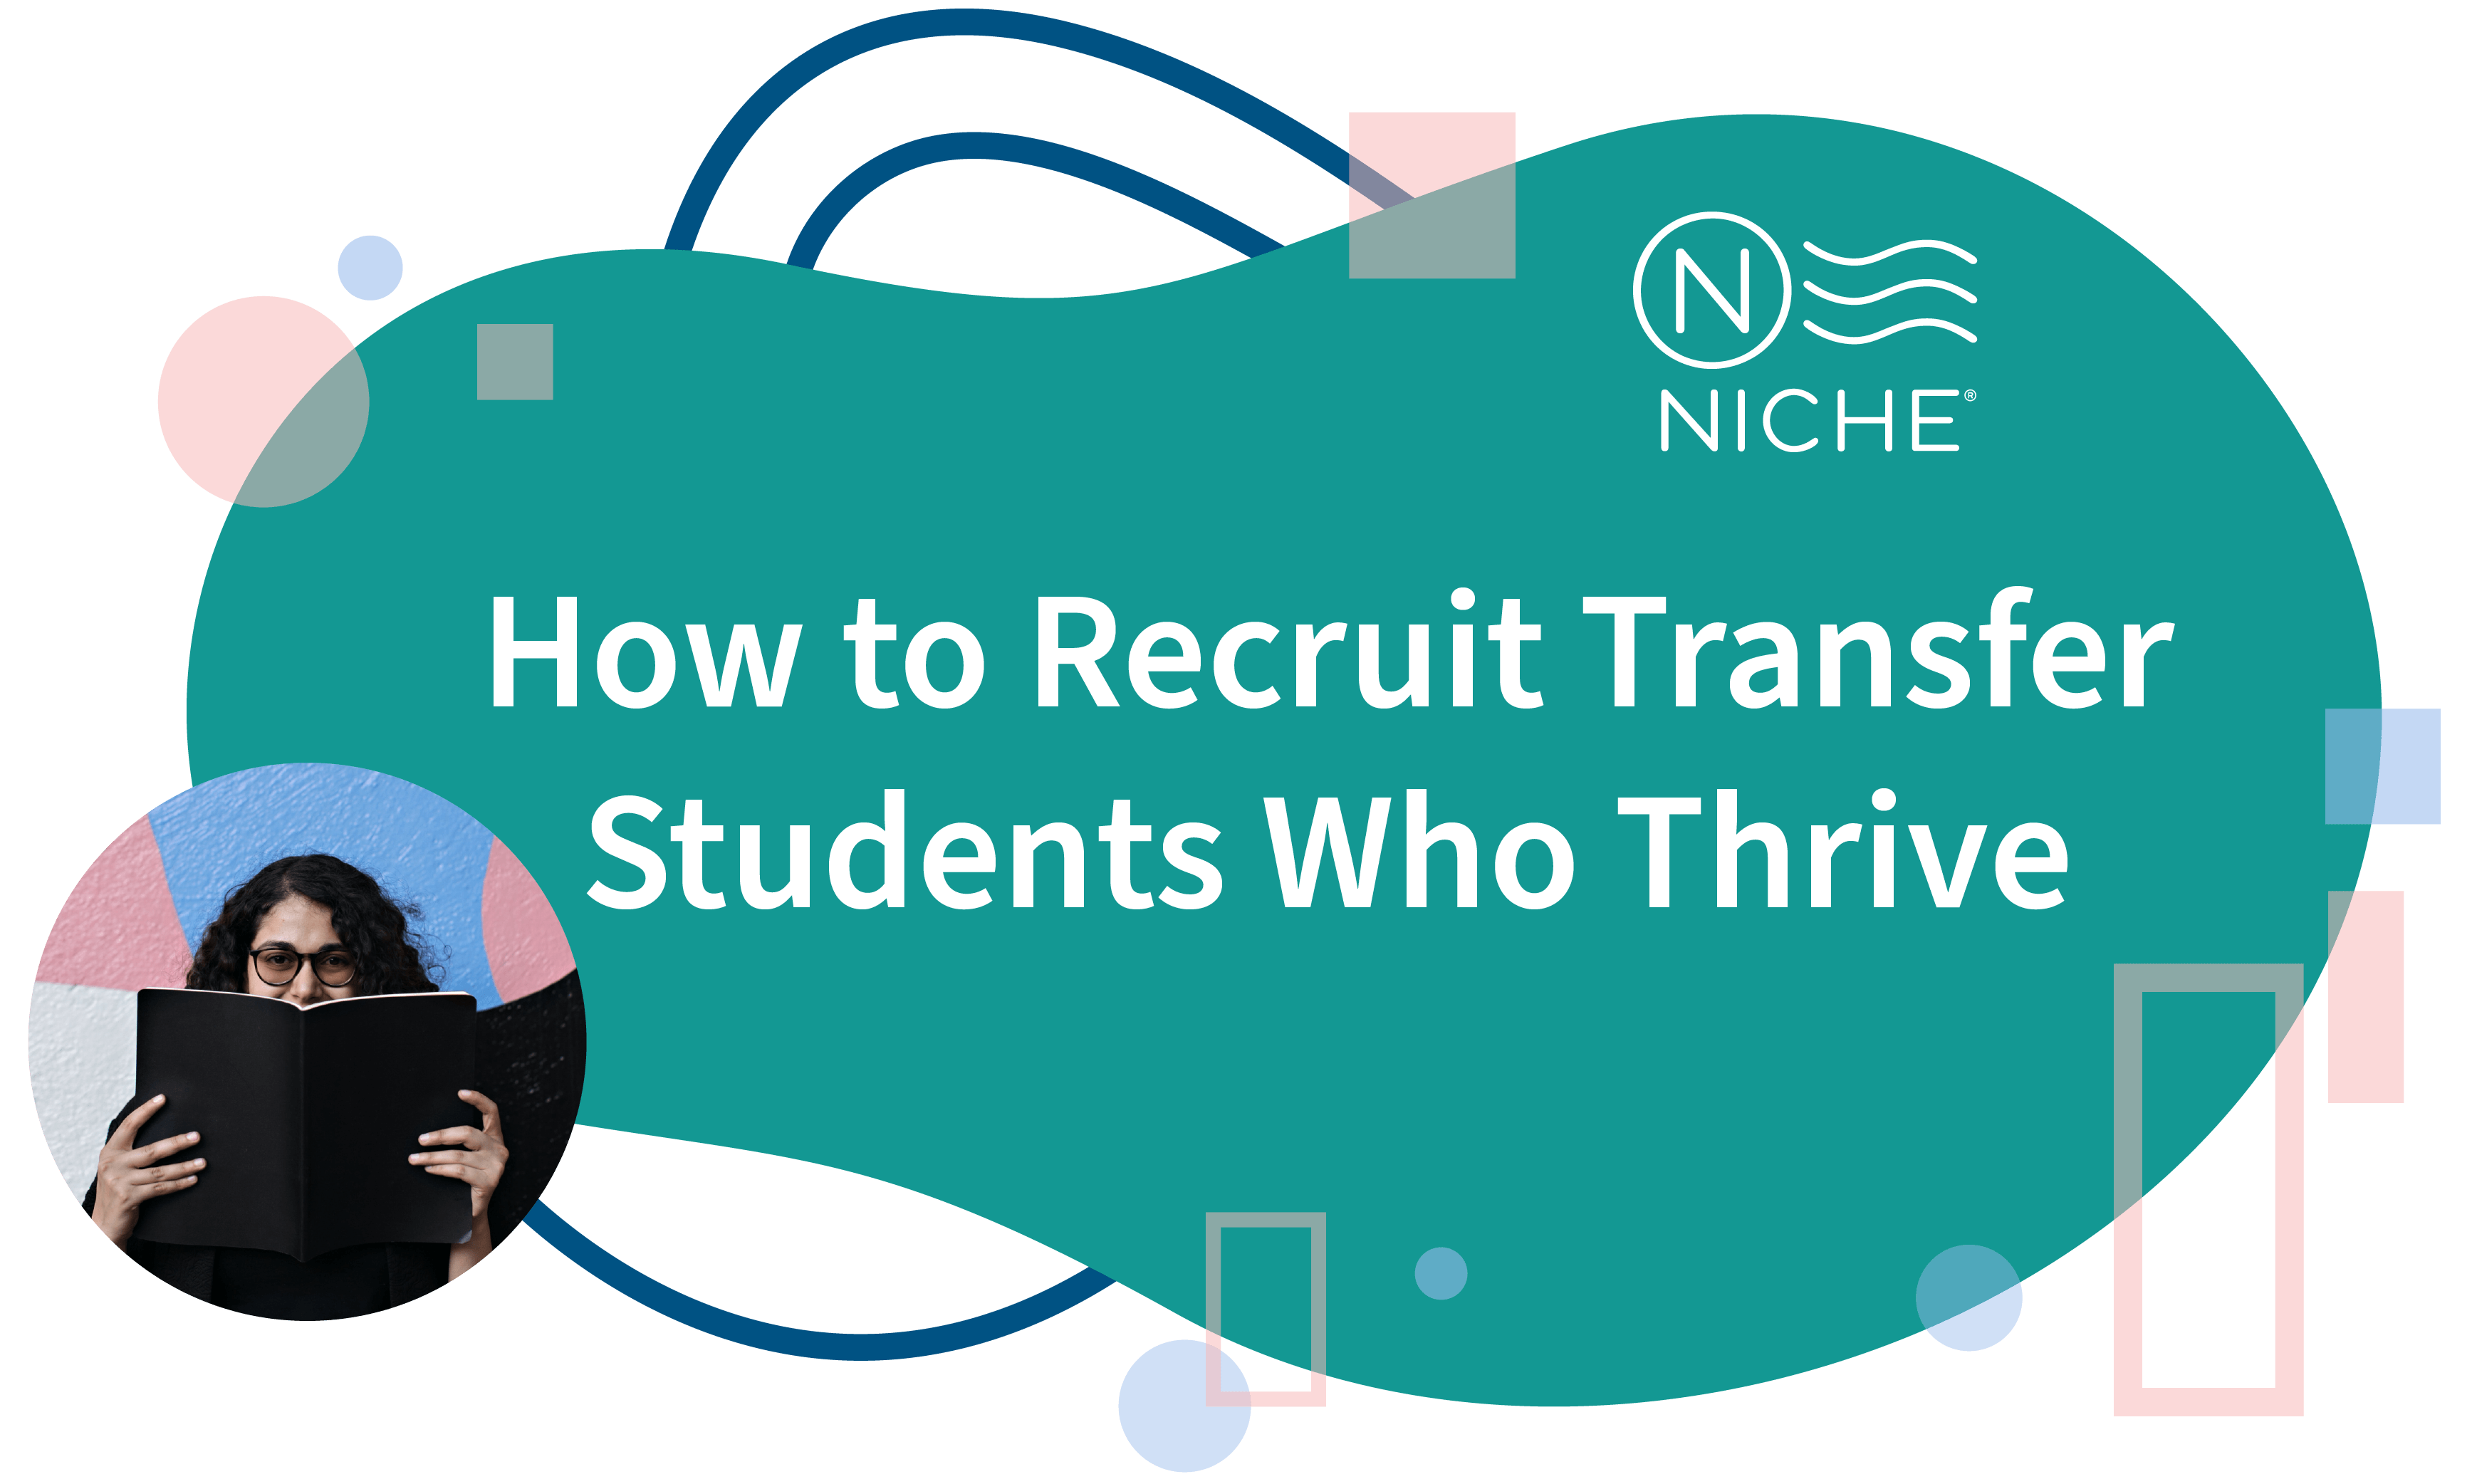 How to Recruit Transfer Students Who Thrive